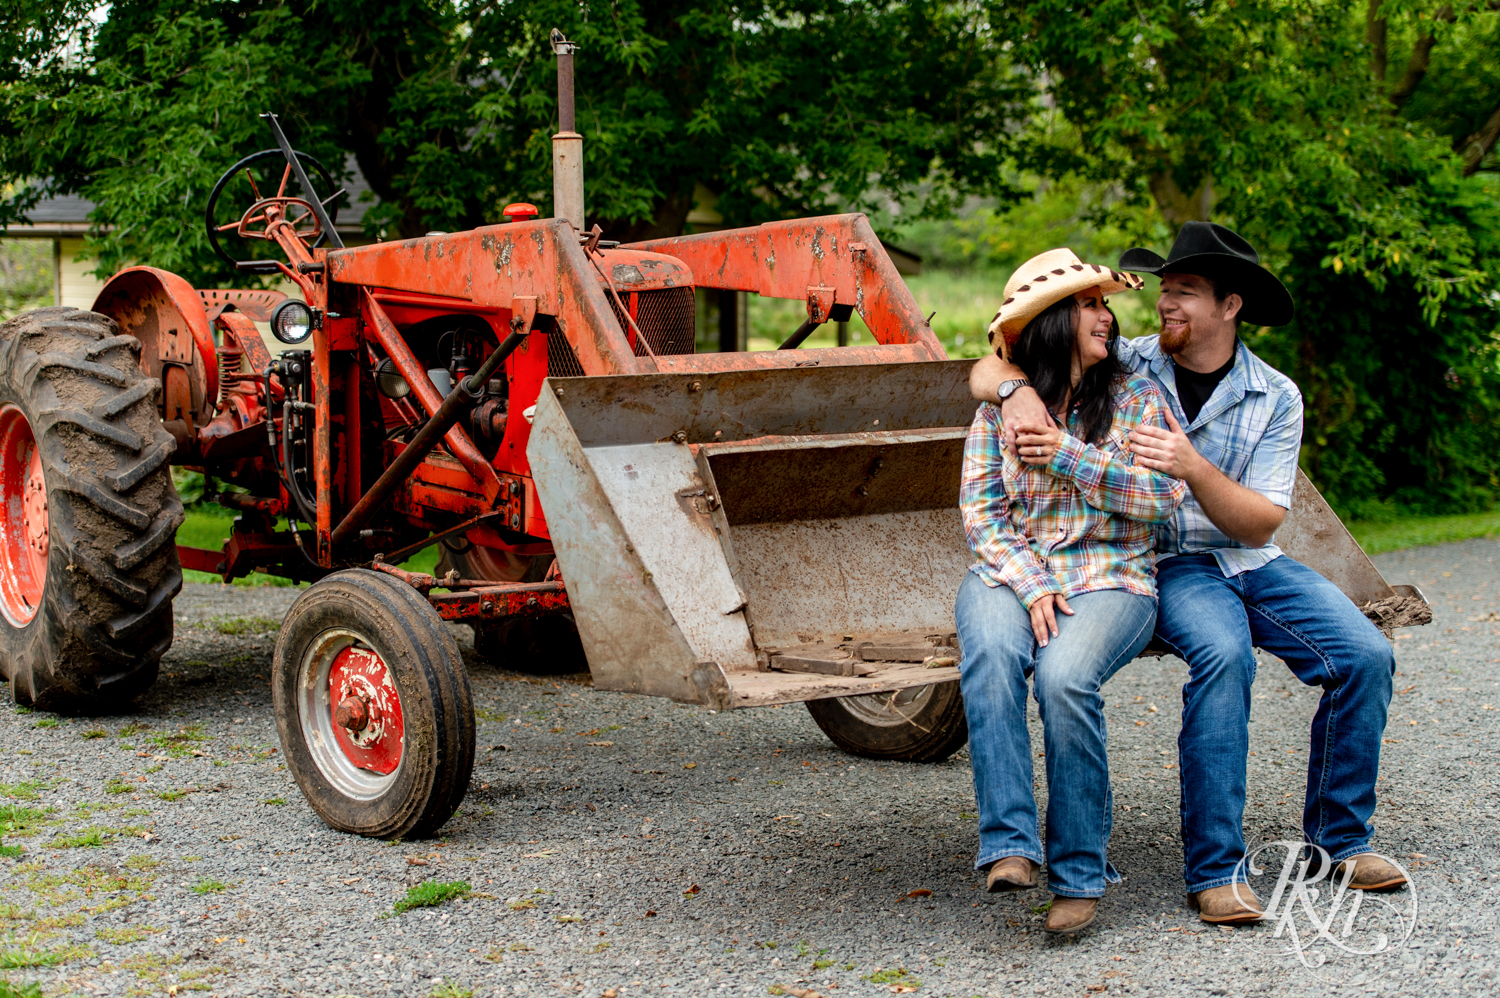 Lebanese woman and man in cowboy hats smile in tractor at their horse farm in Chisago City, Minnesota.